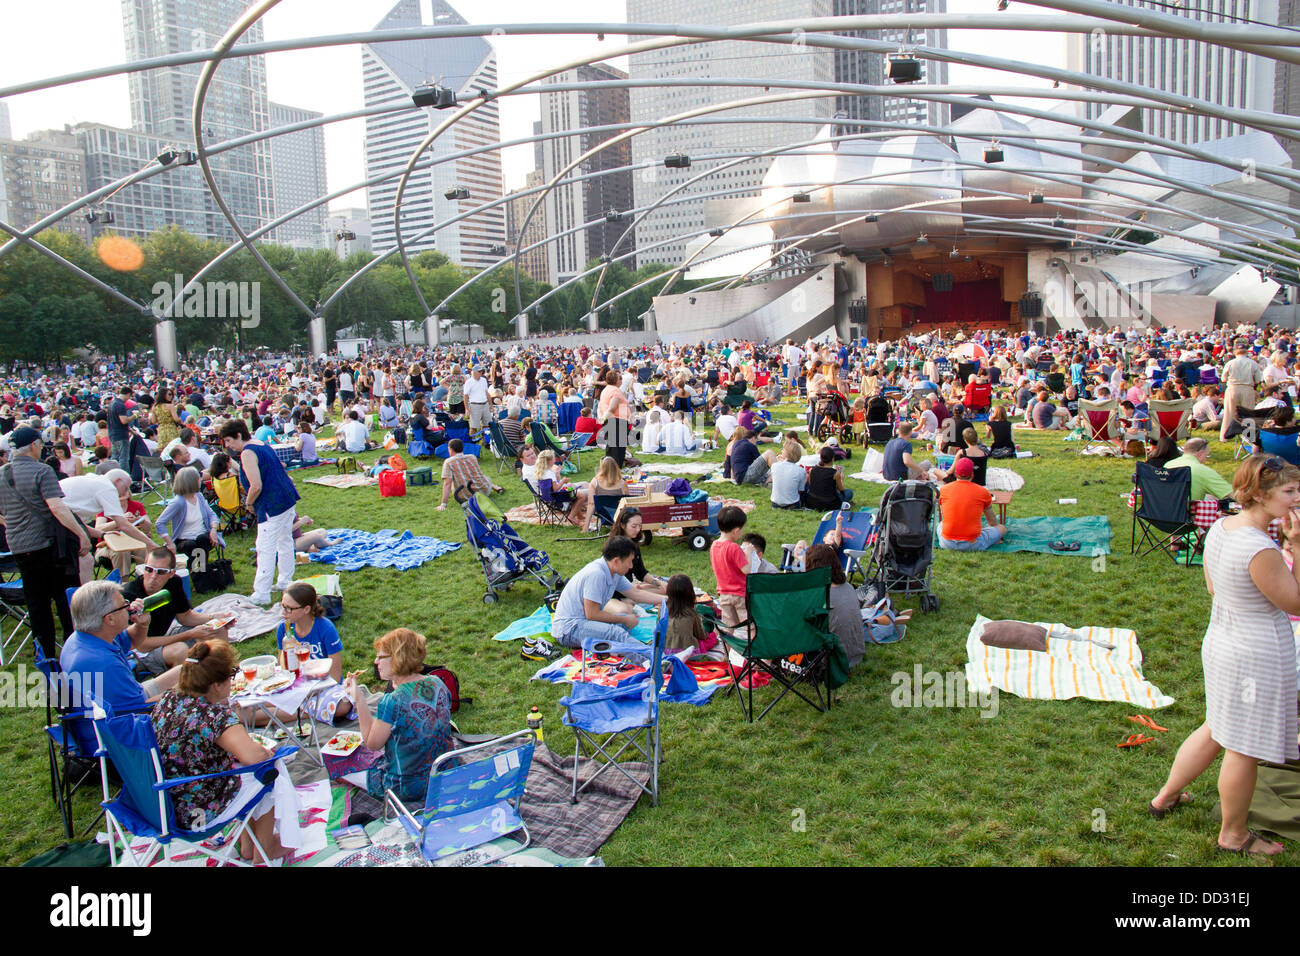 People enjoy an afternoon concert in Millennium park, Chicago, Illinois